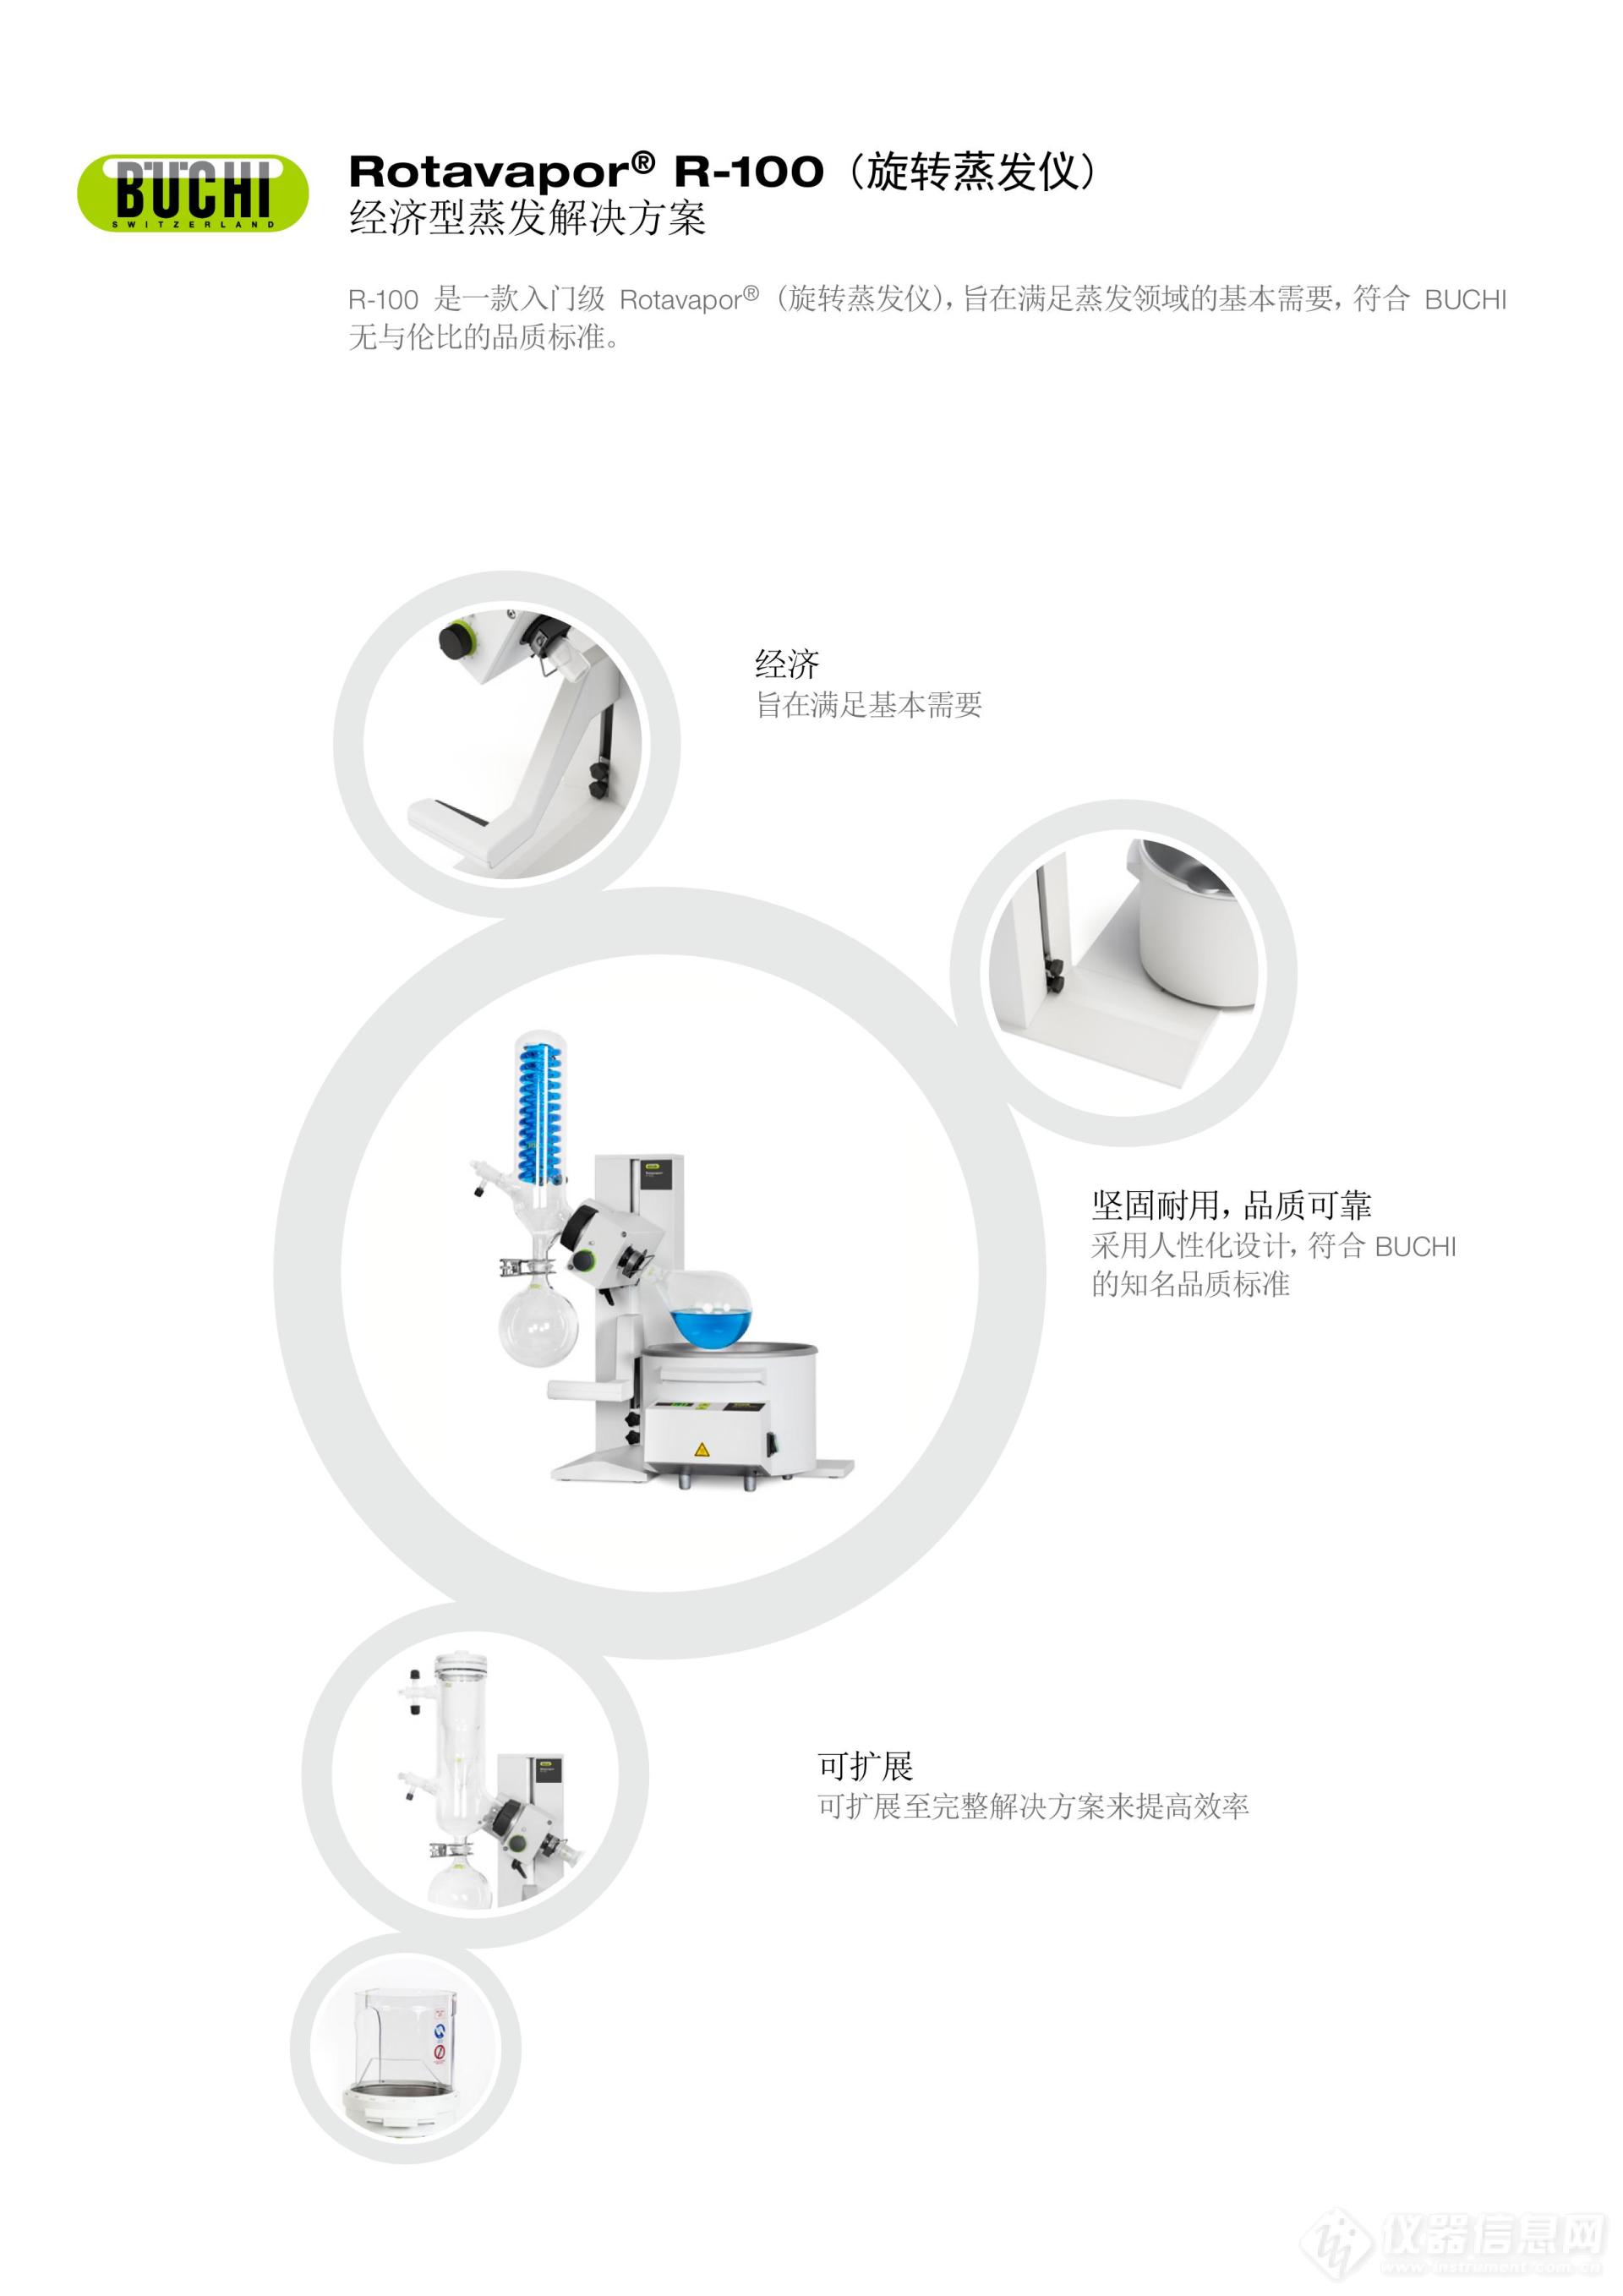 Rotavapor_R-100_Product_Brochure_zh_A-page-0001.jpg